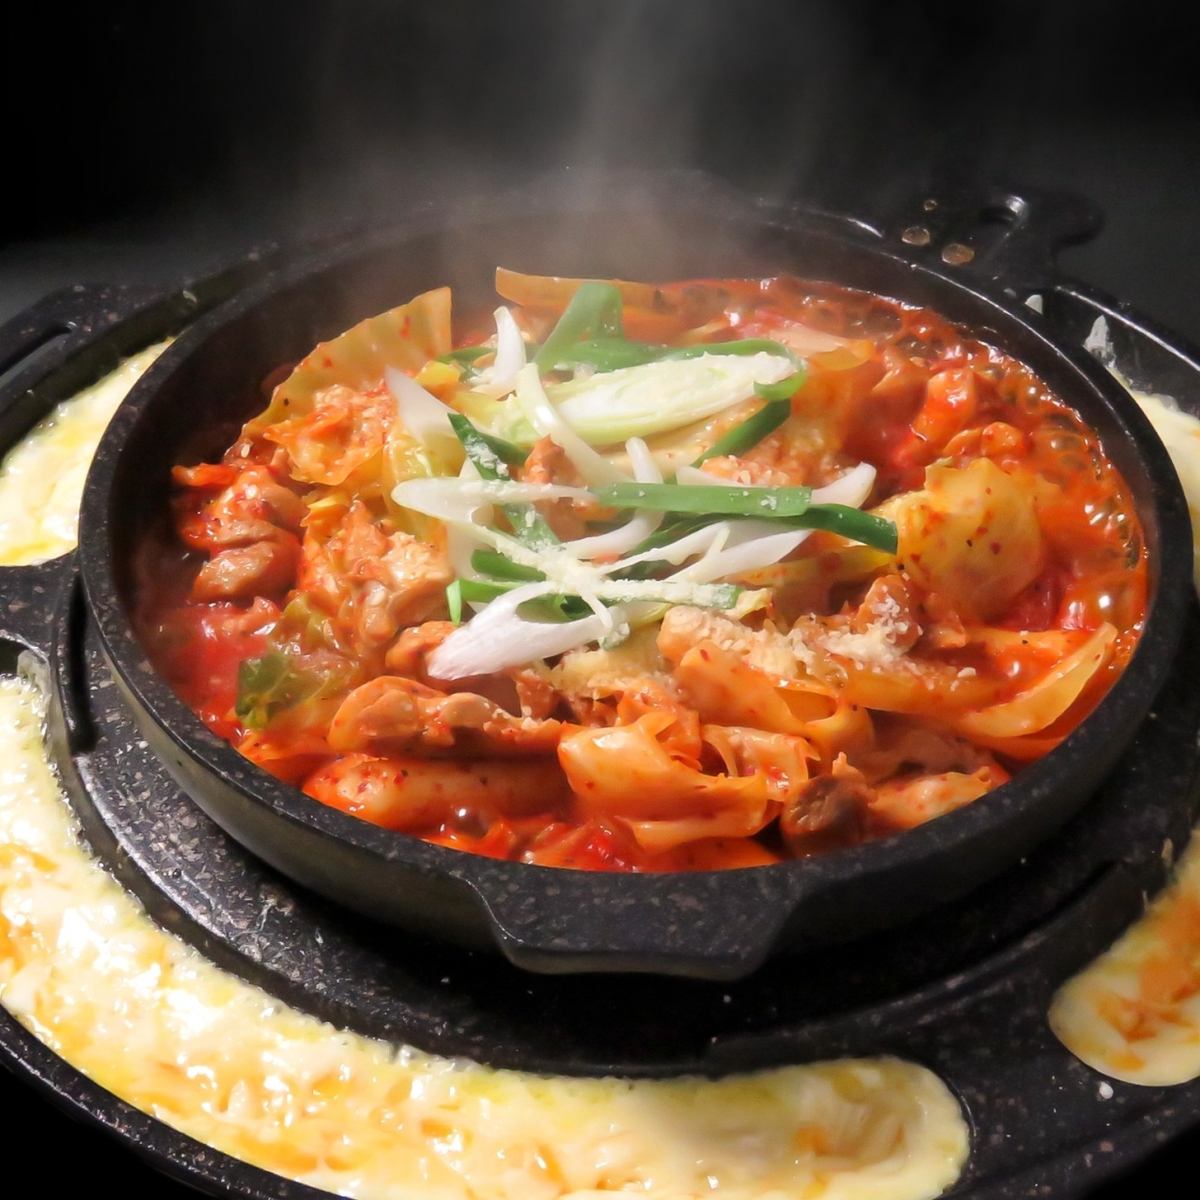 Enjoy the delicious cheese dakgalbi that is sure to get you addicted♪